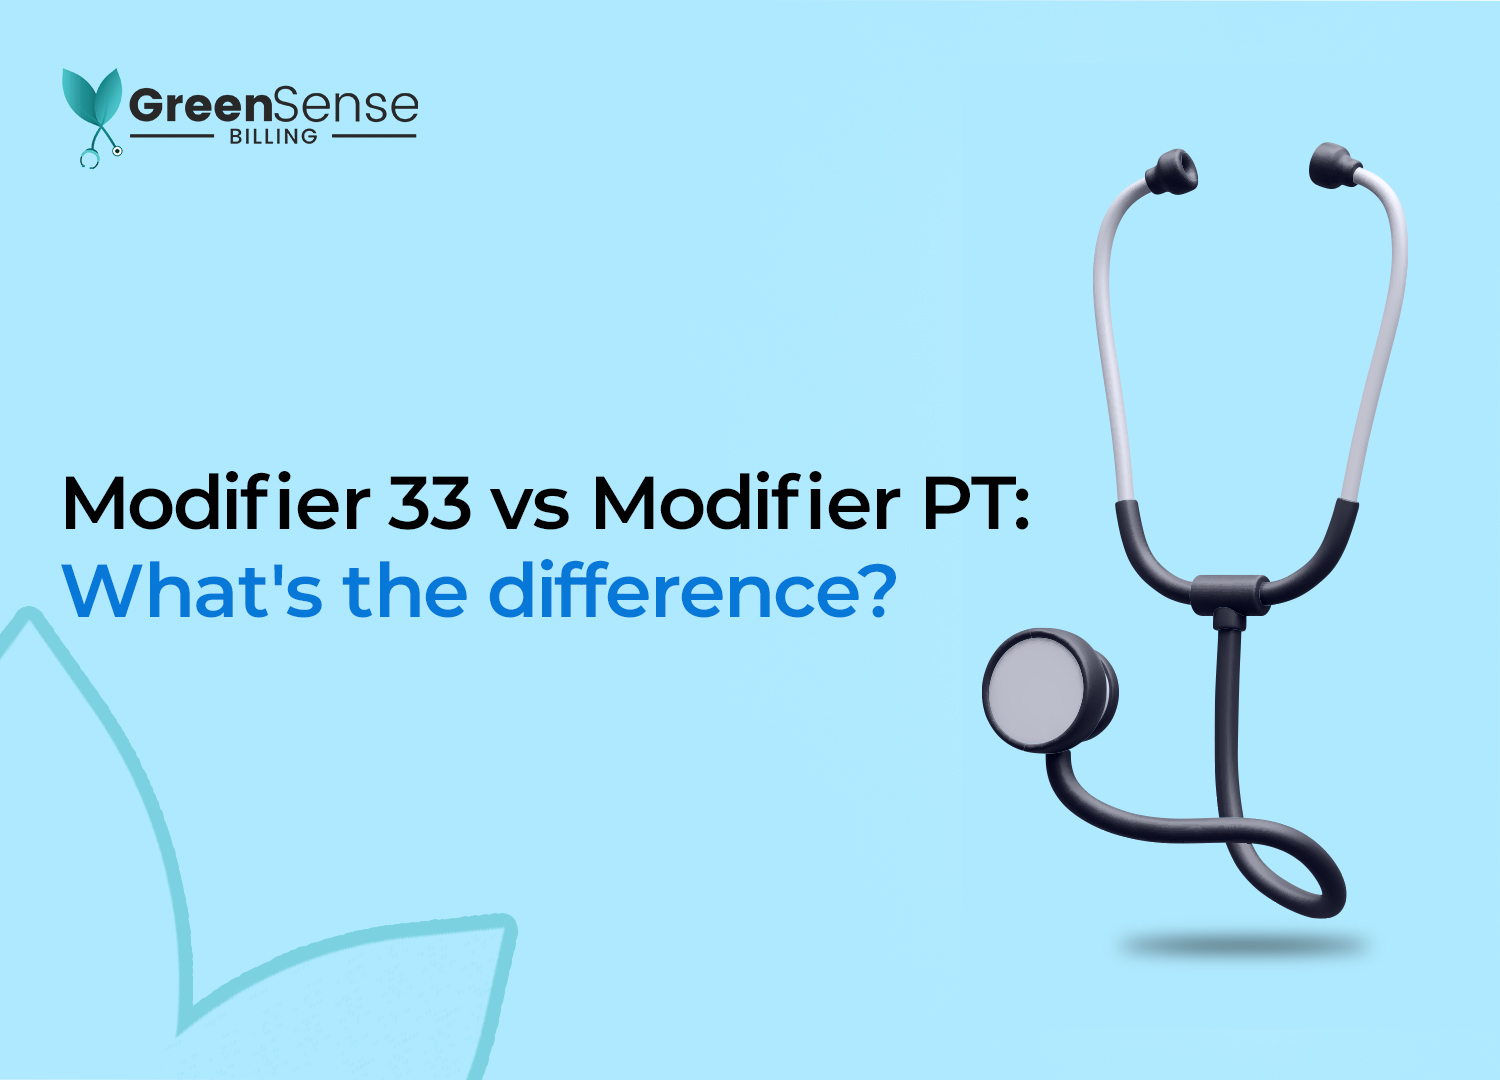 What is the difference between modifier 33 vs modifier PT